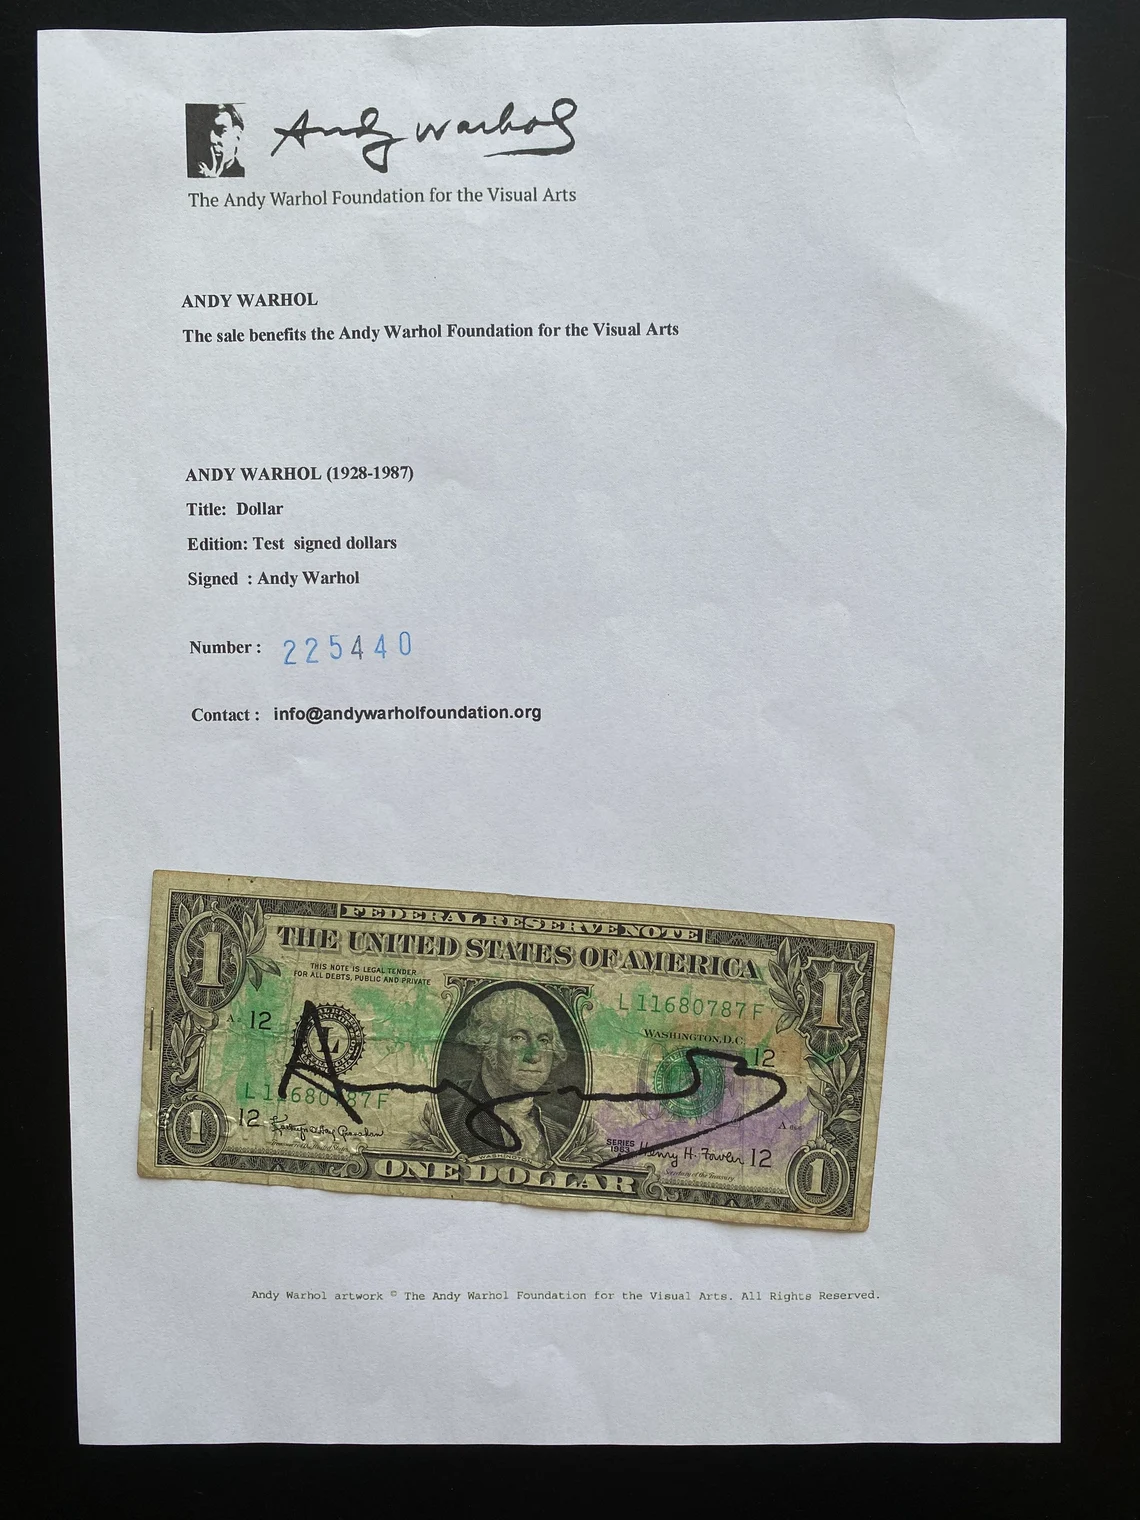 Fake Andy Warhol authentication certificate